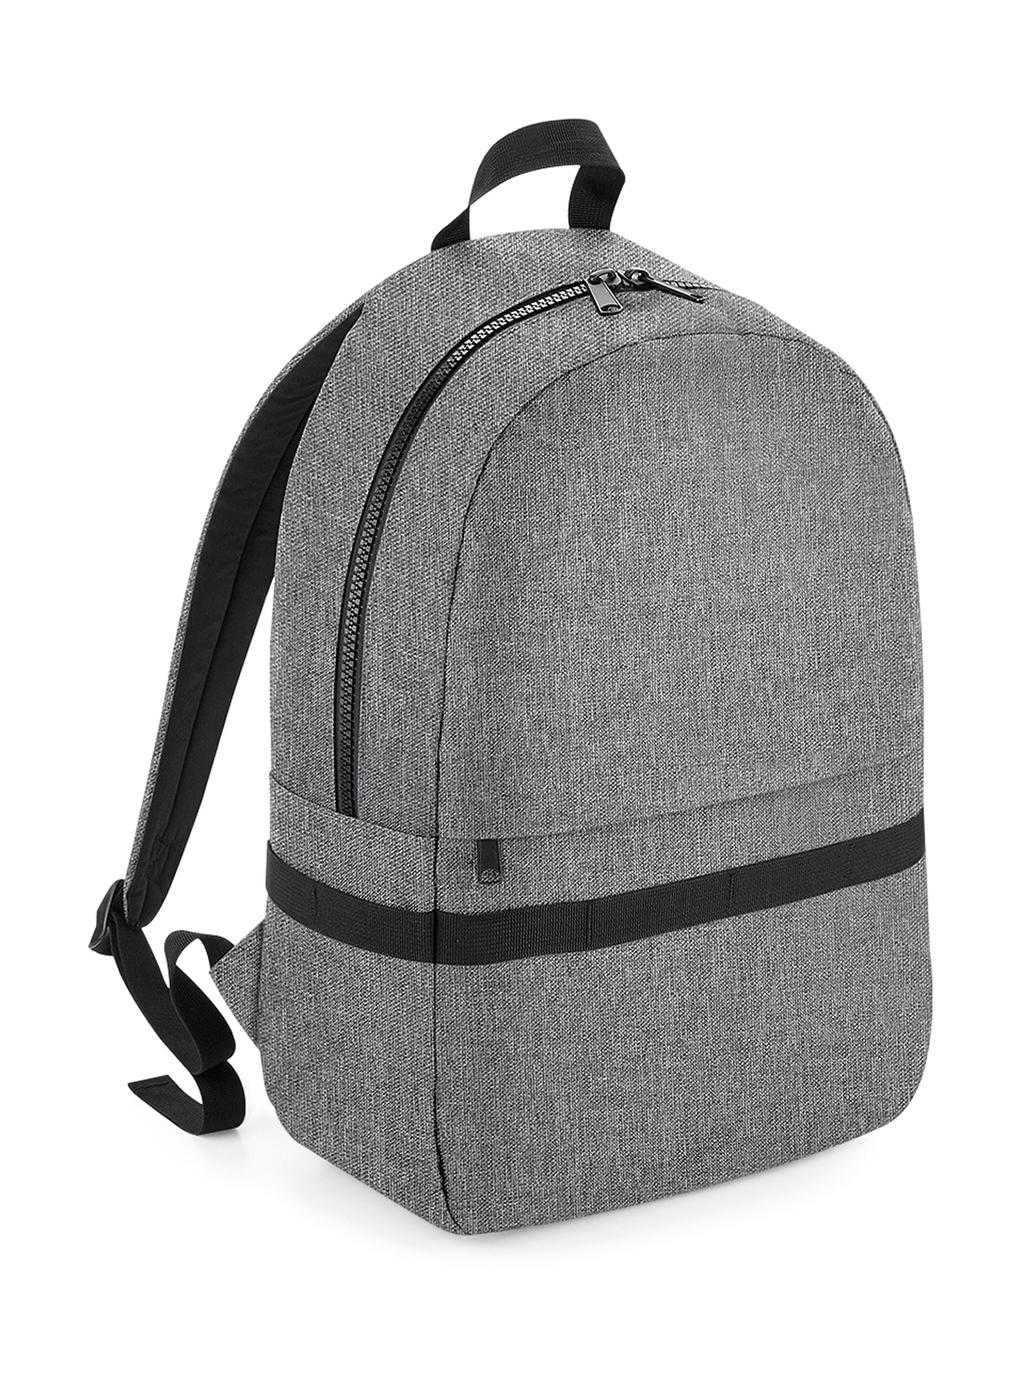  Modulr? 20 Litre Backpack in Farbe Grey Marl